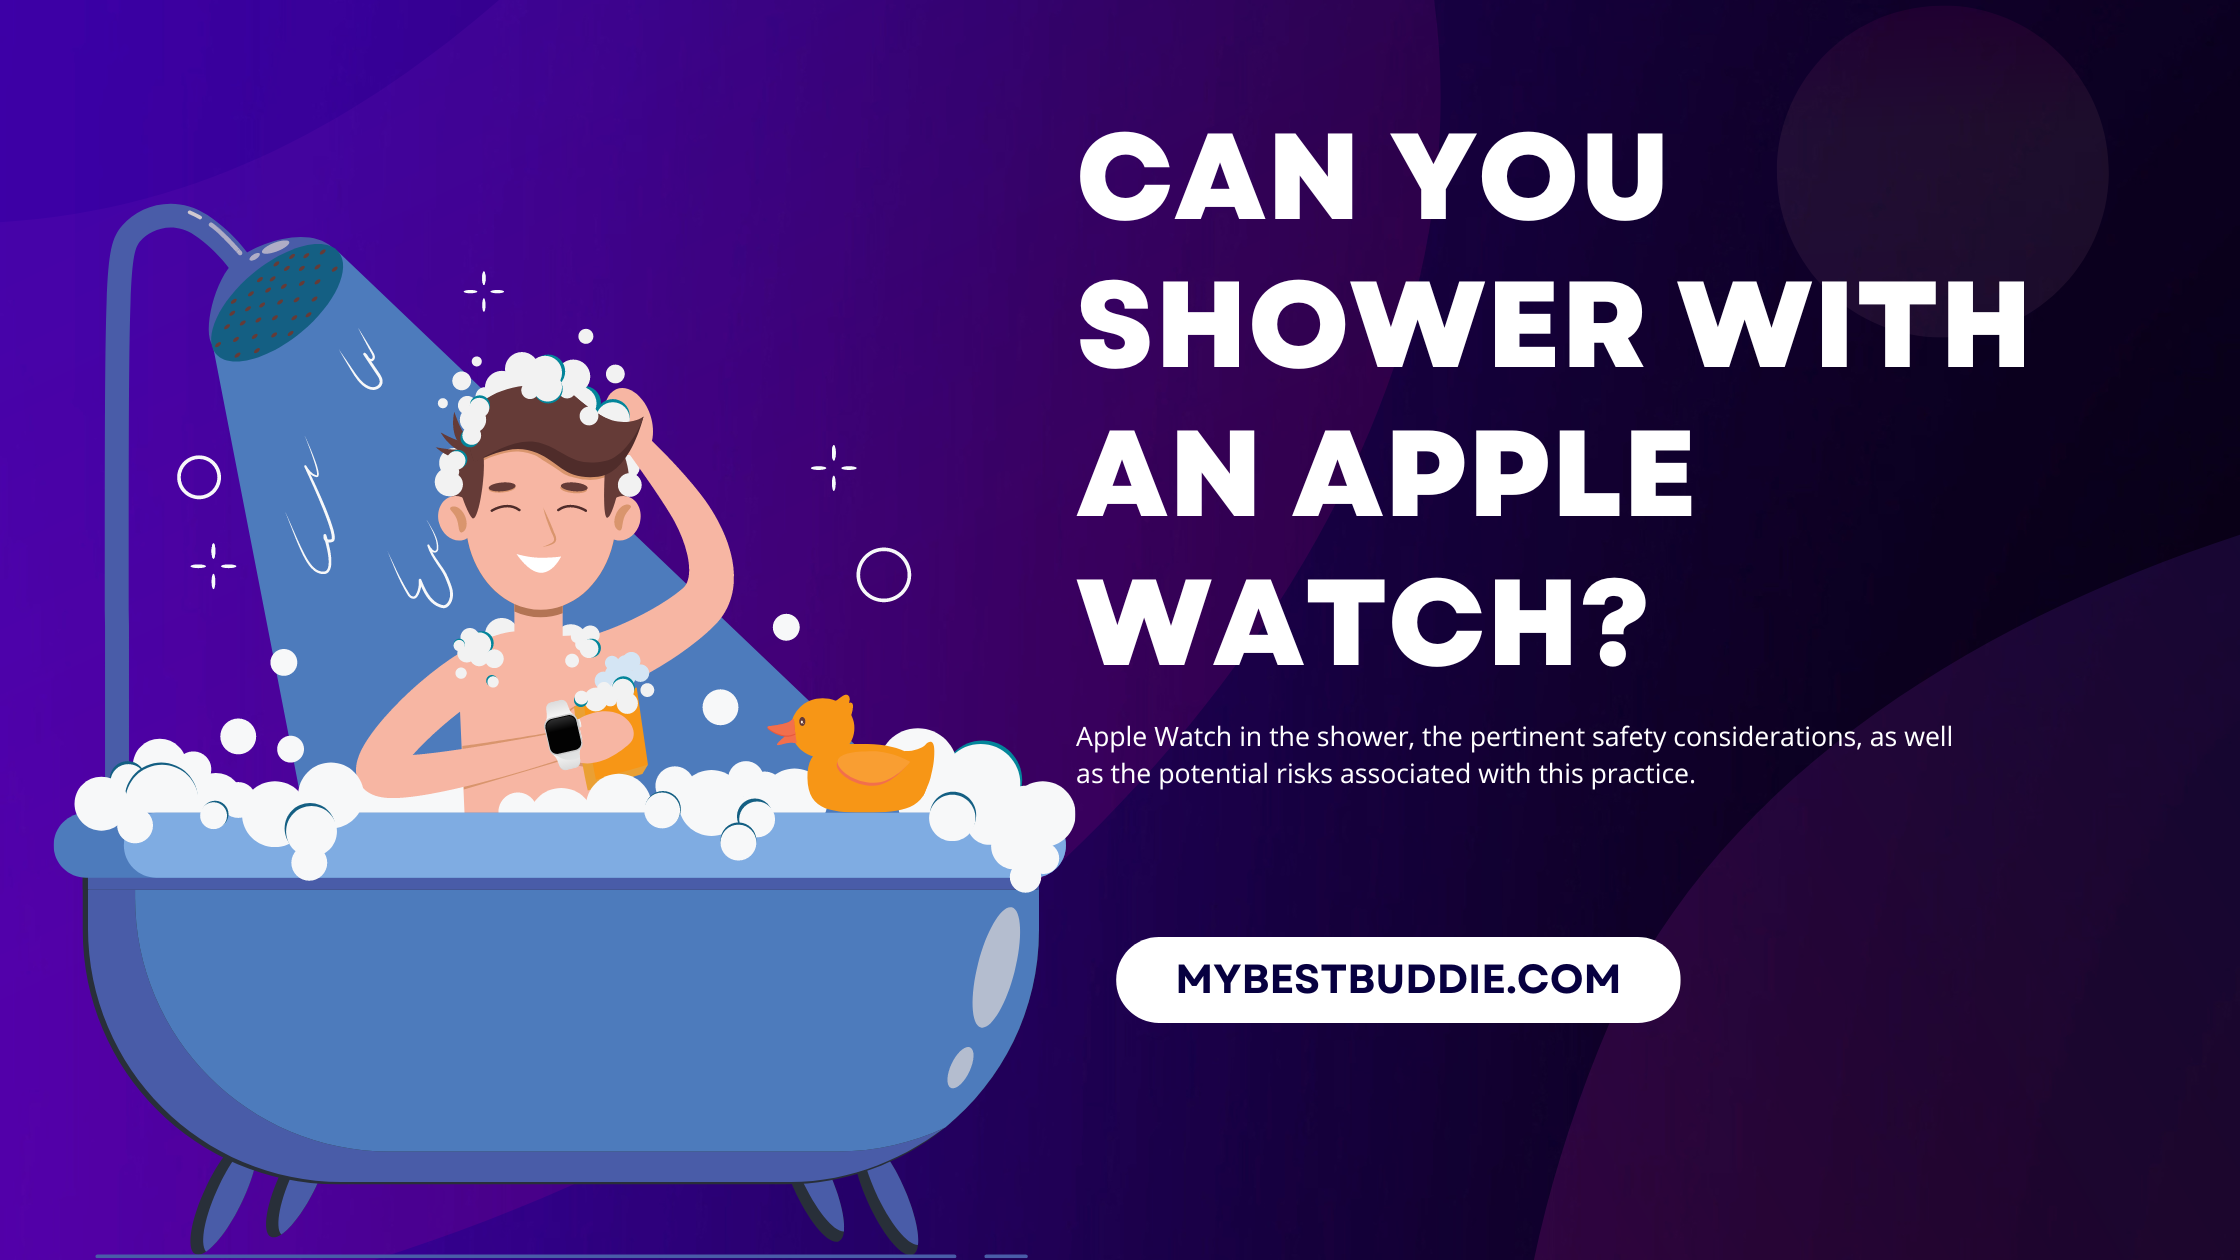 Can you shower with an apple watch